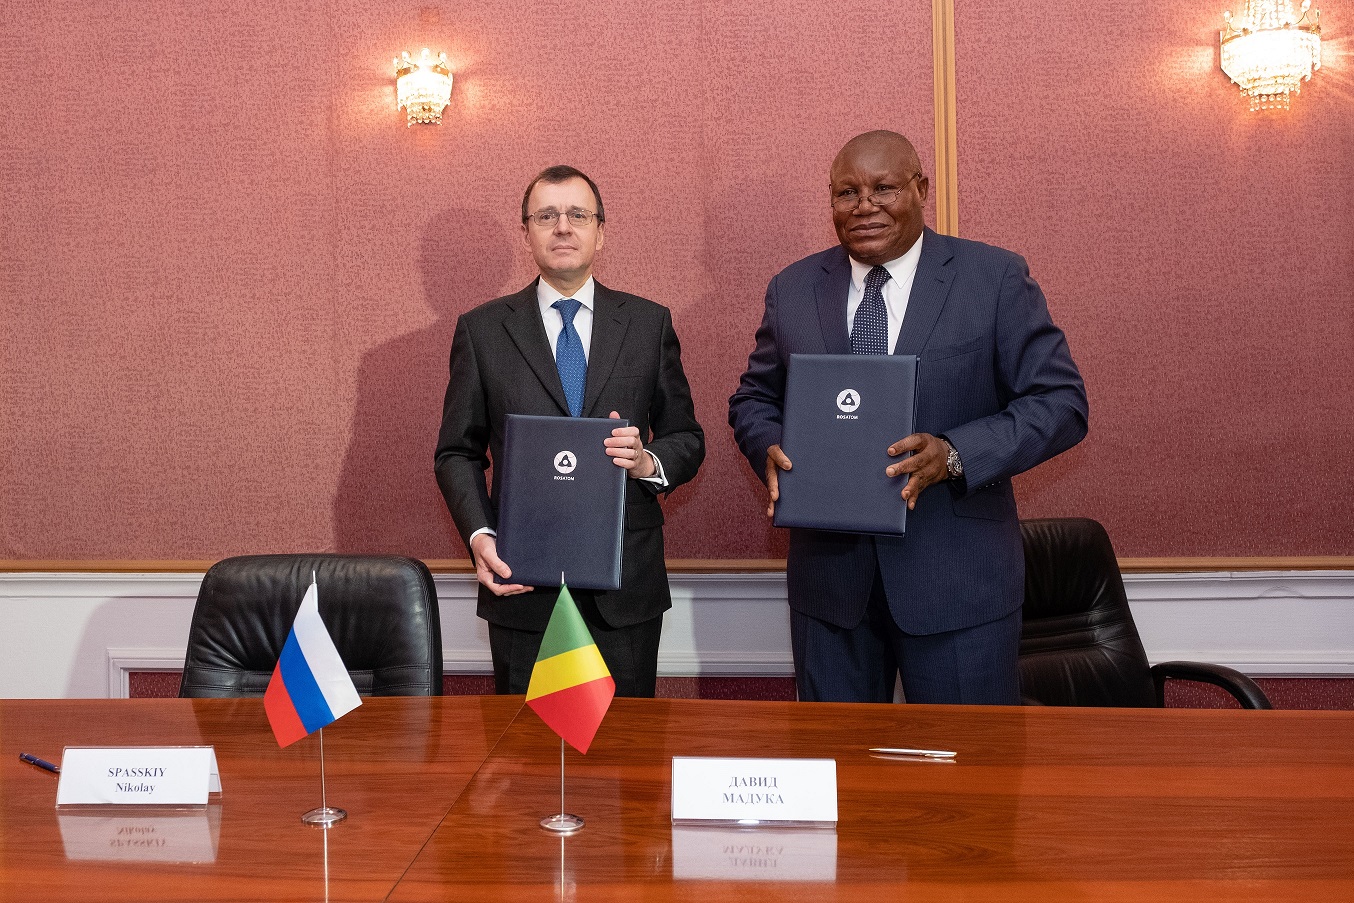 The Democratic Republic of the Congo and Rosatom will devel workforce capacity and make efforts to create a positive public opinion on nuclear energy